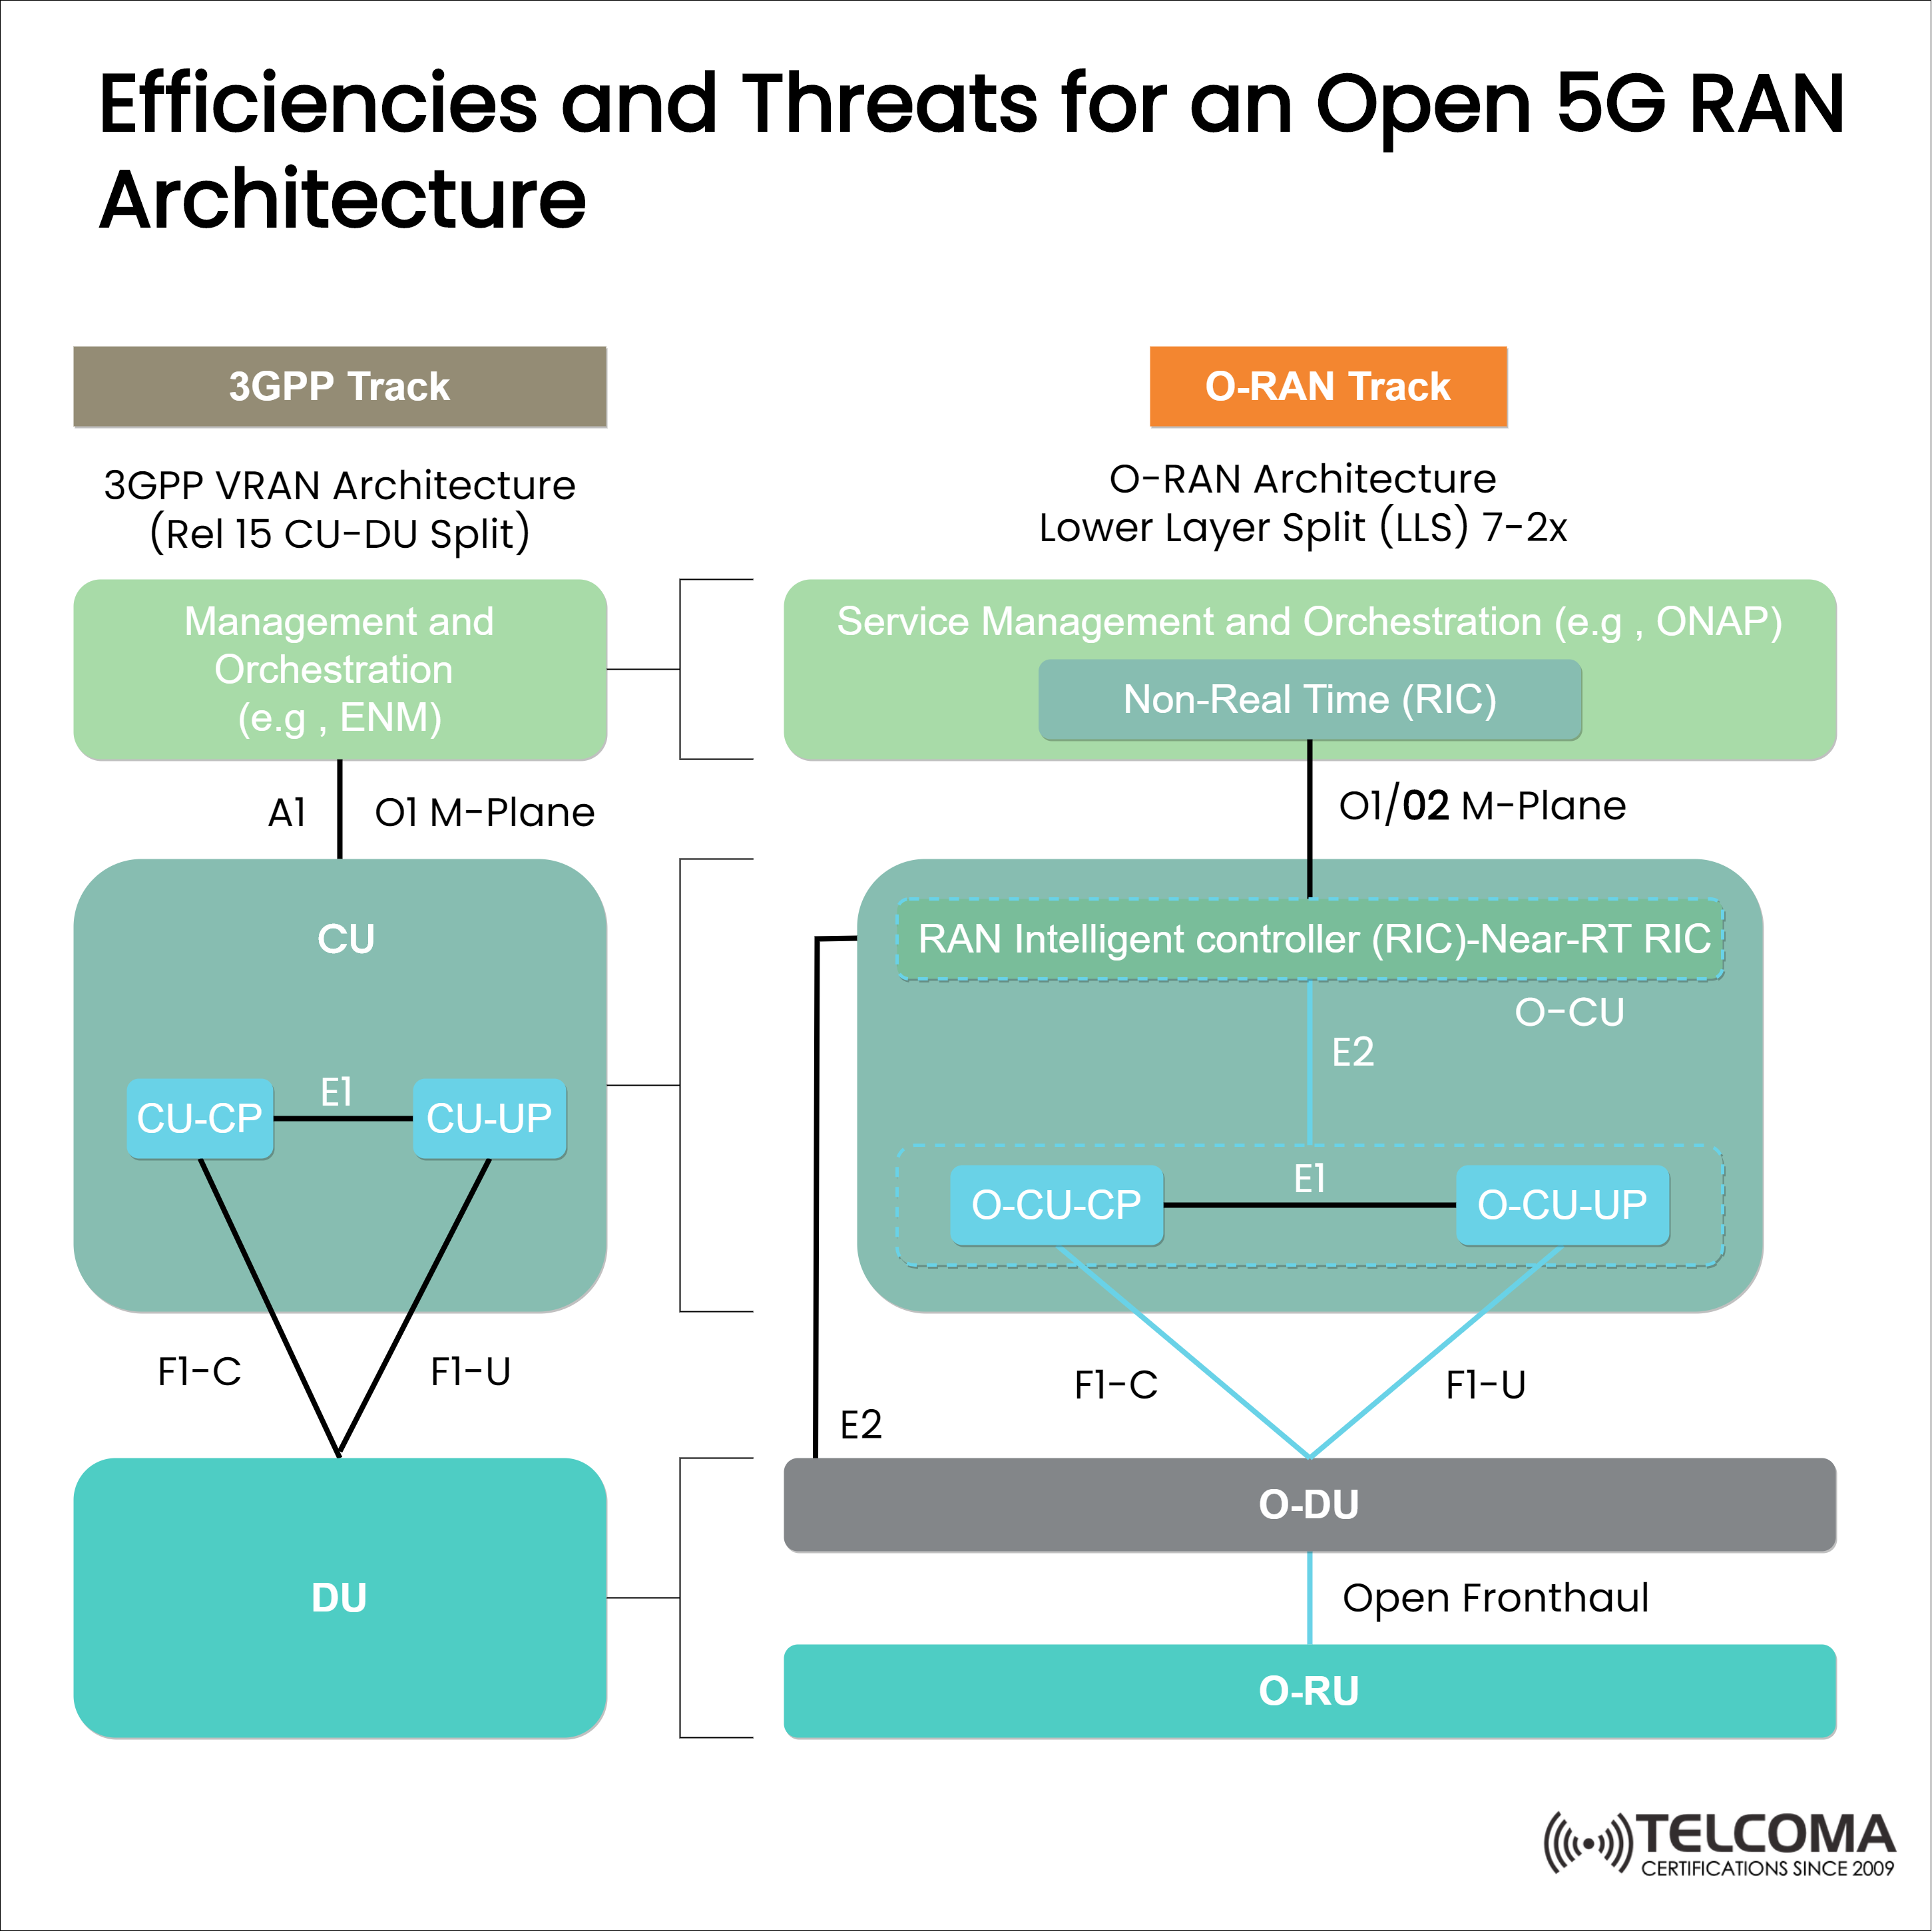 efficiencies and threats for open 5g ran architecture